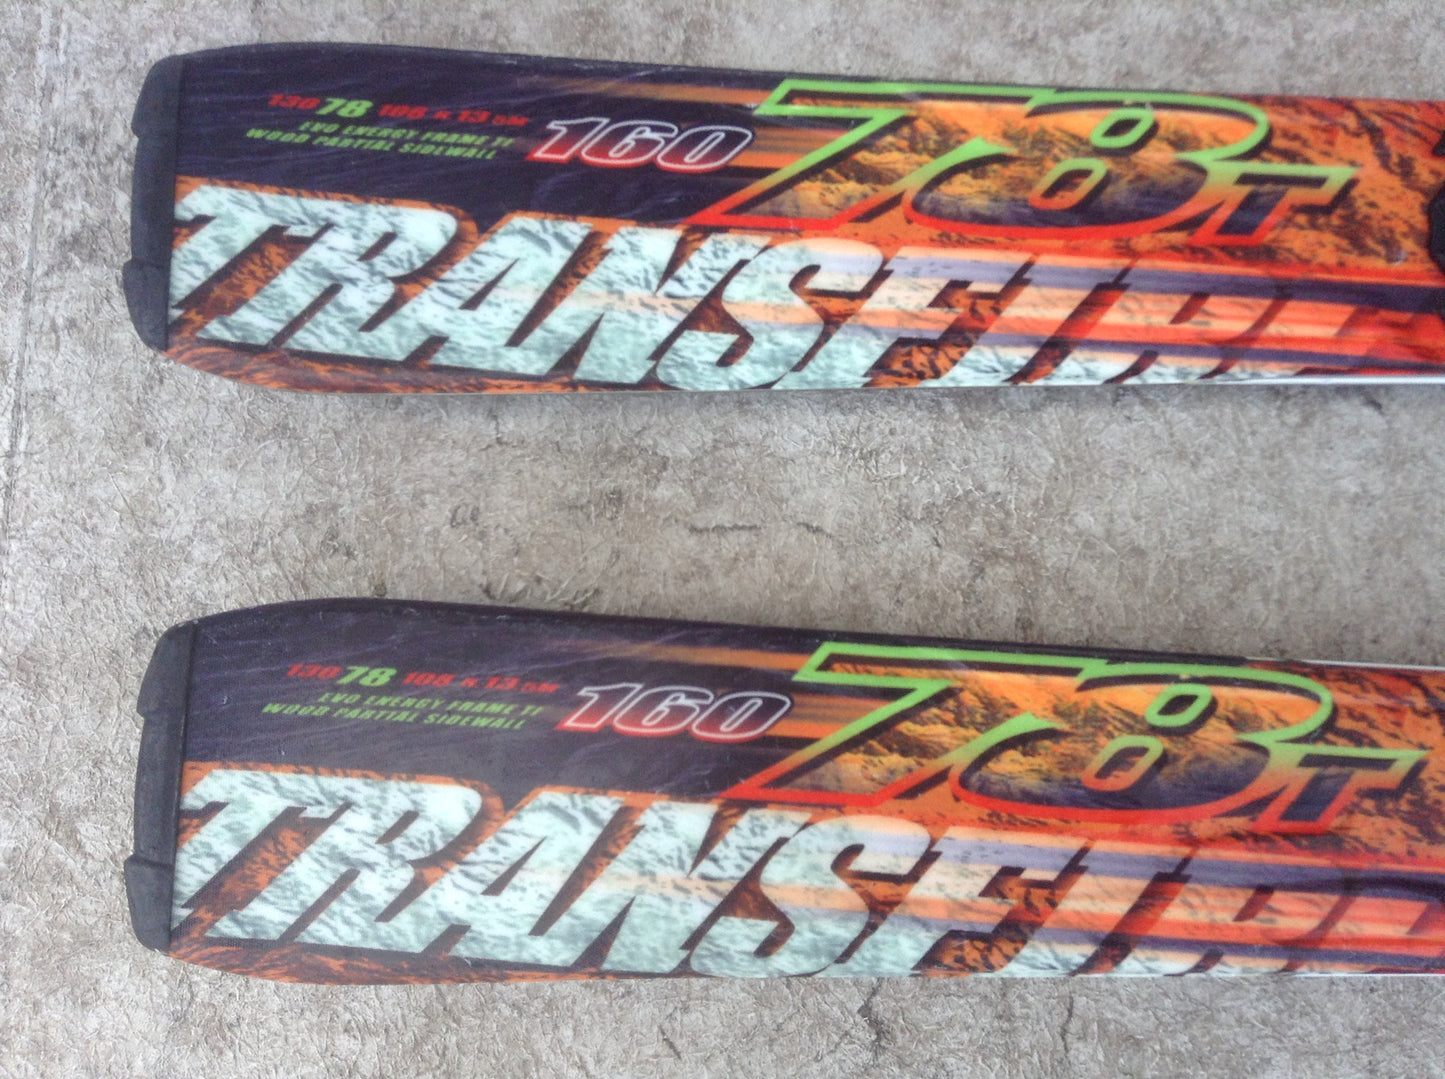 Ski 160 Nordica Tansfire Parabolic Red Lime With Bindings